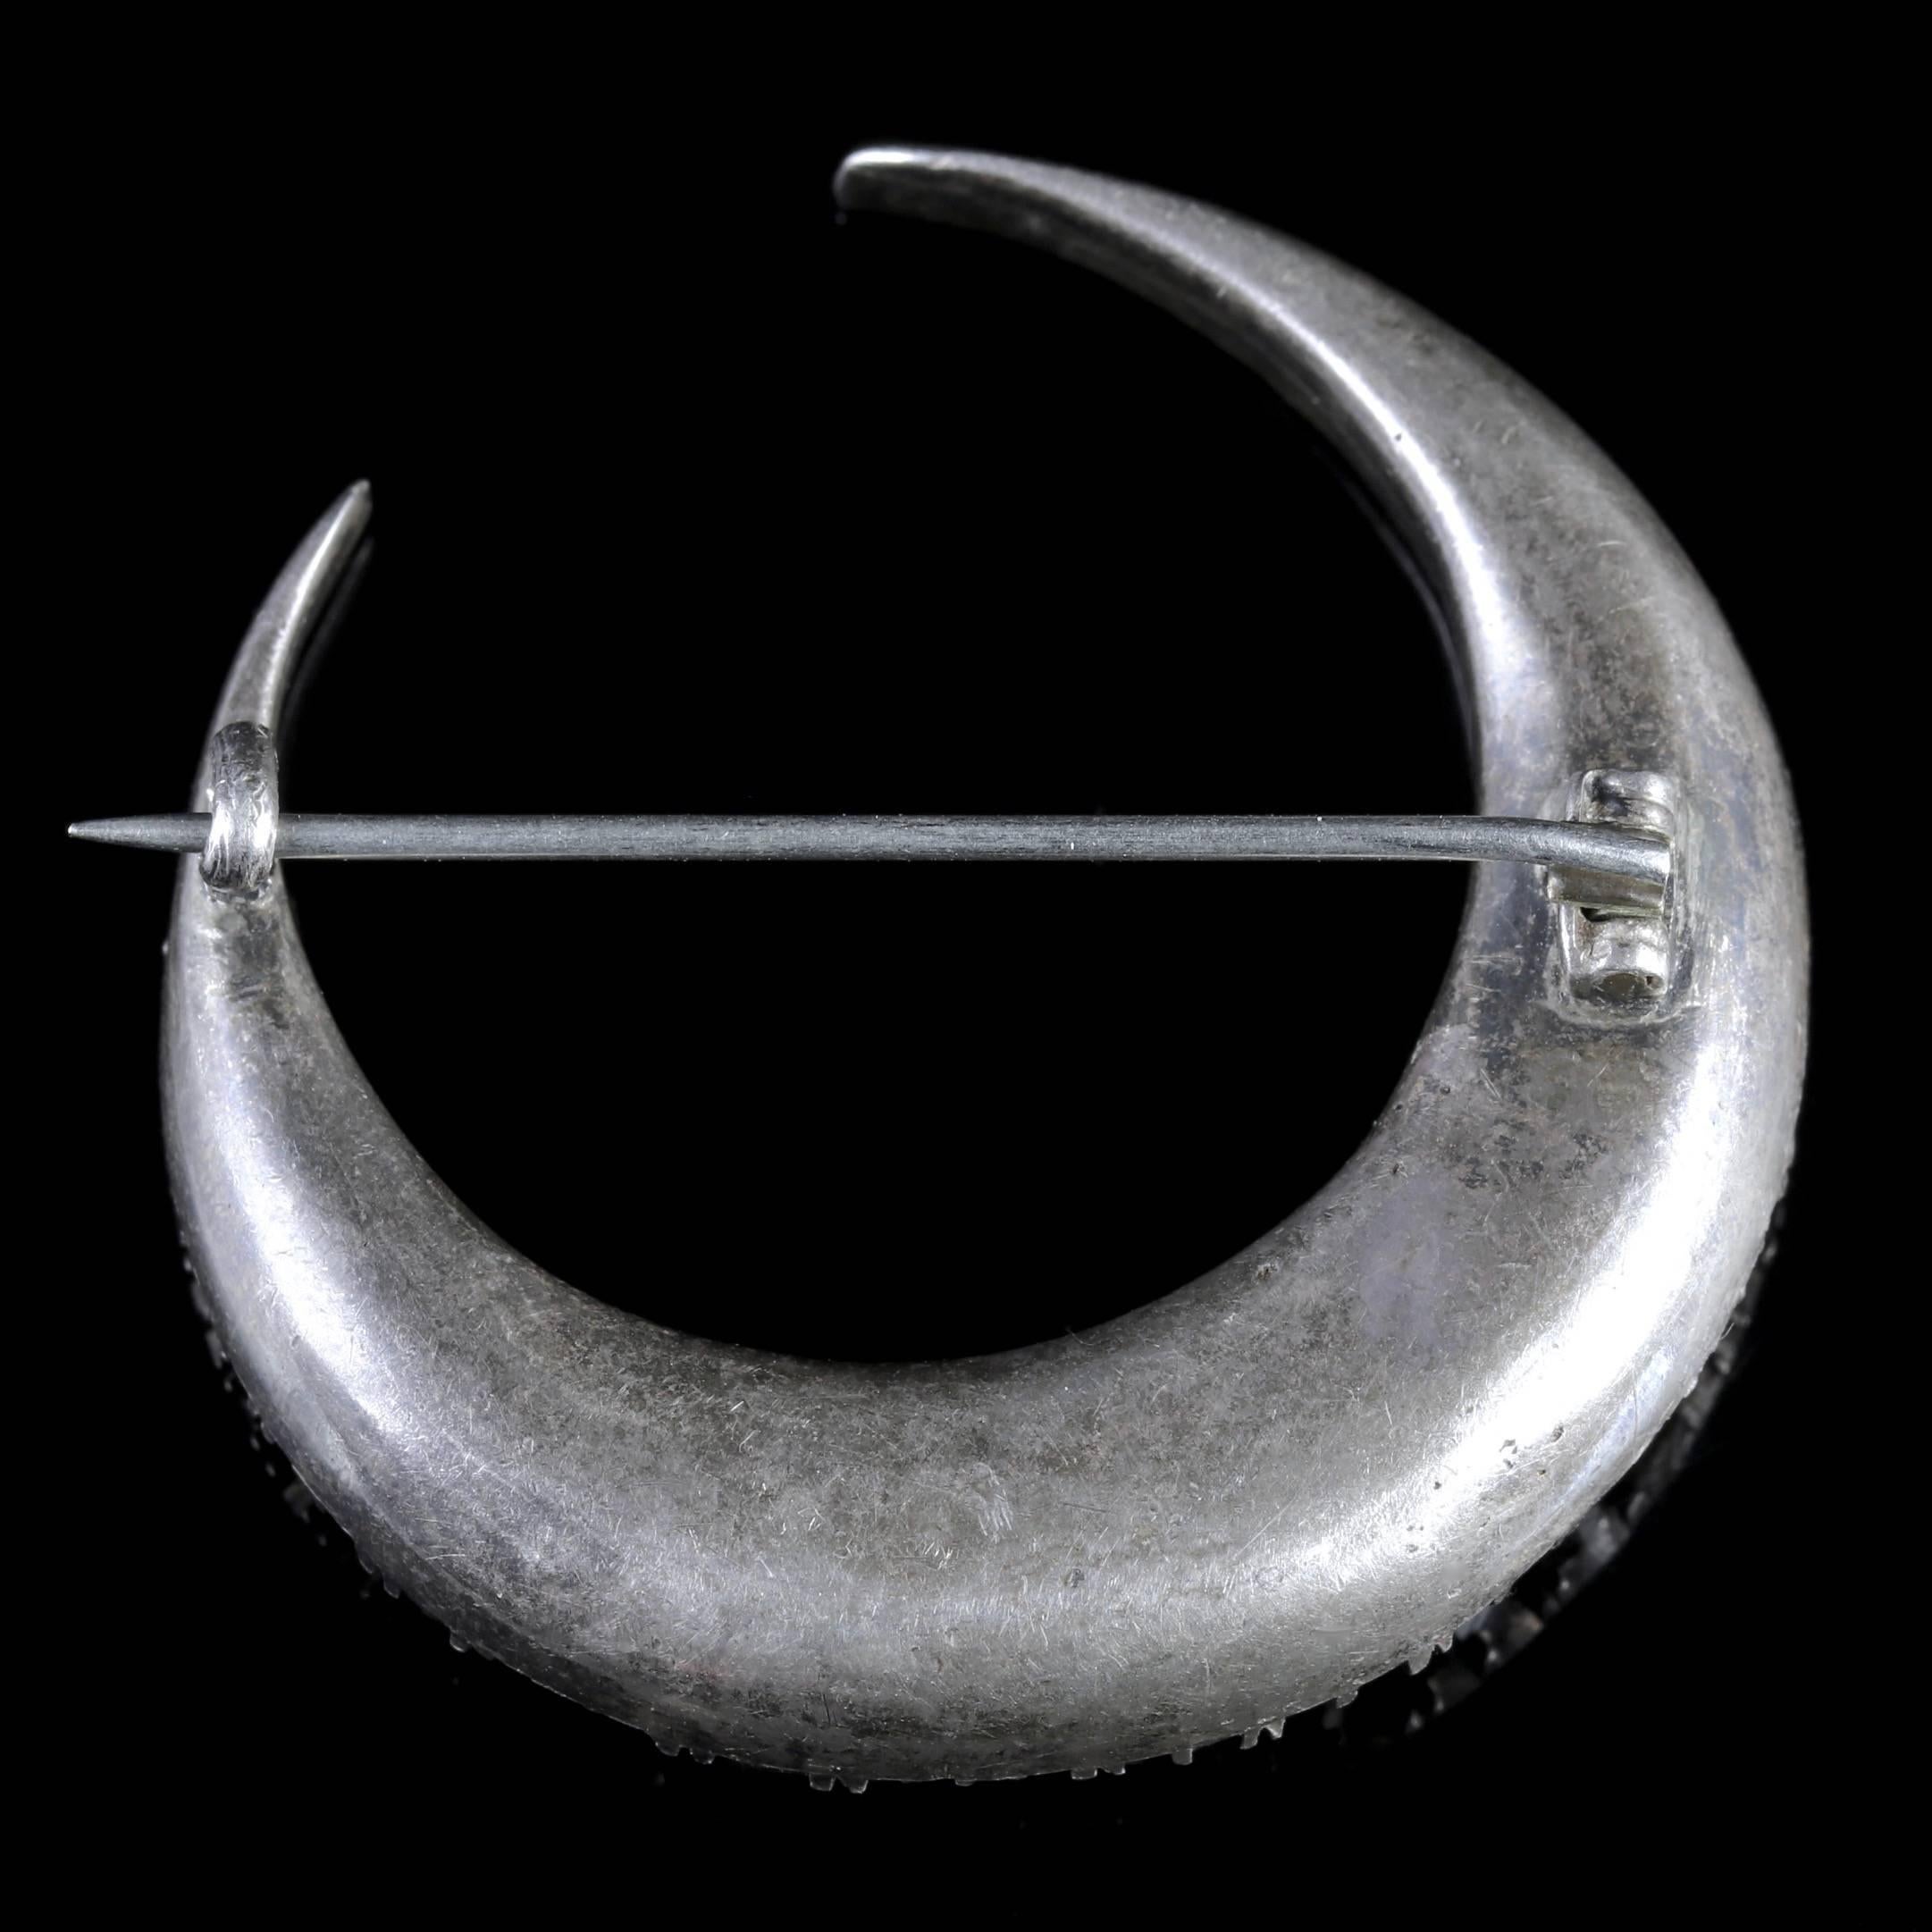 To read more please click continue reading below-

This fabulous antique Silver Crescent moon Paste Brooch is genuine Victorian Circa 1860. 

The wonderful brooch depicts a crescent moon adorned with sparkling white Paste Stones graduating in